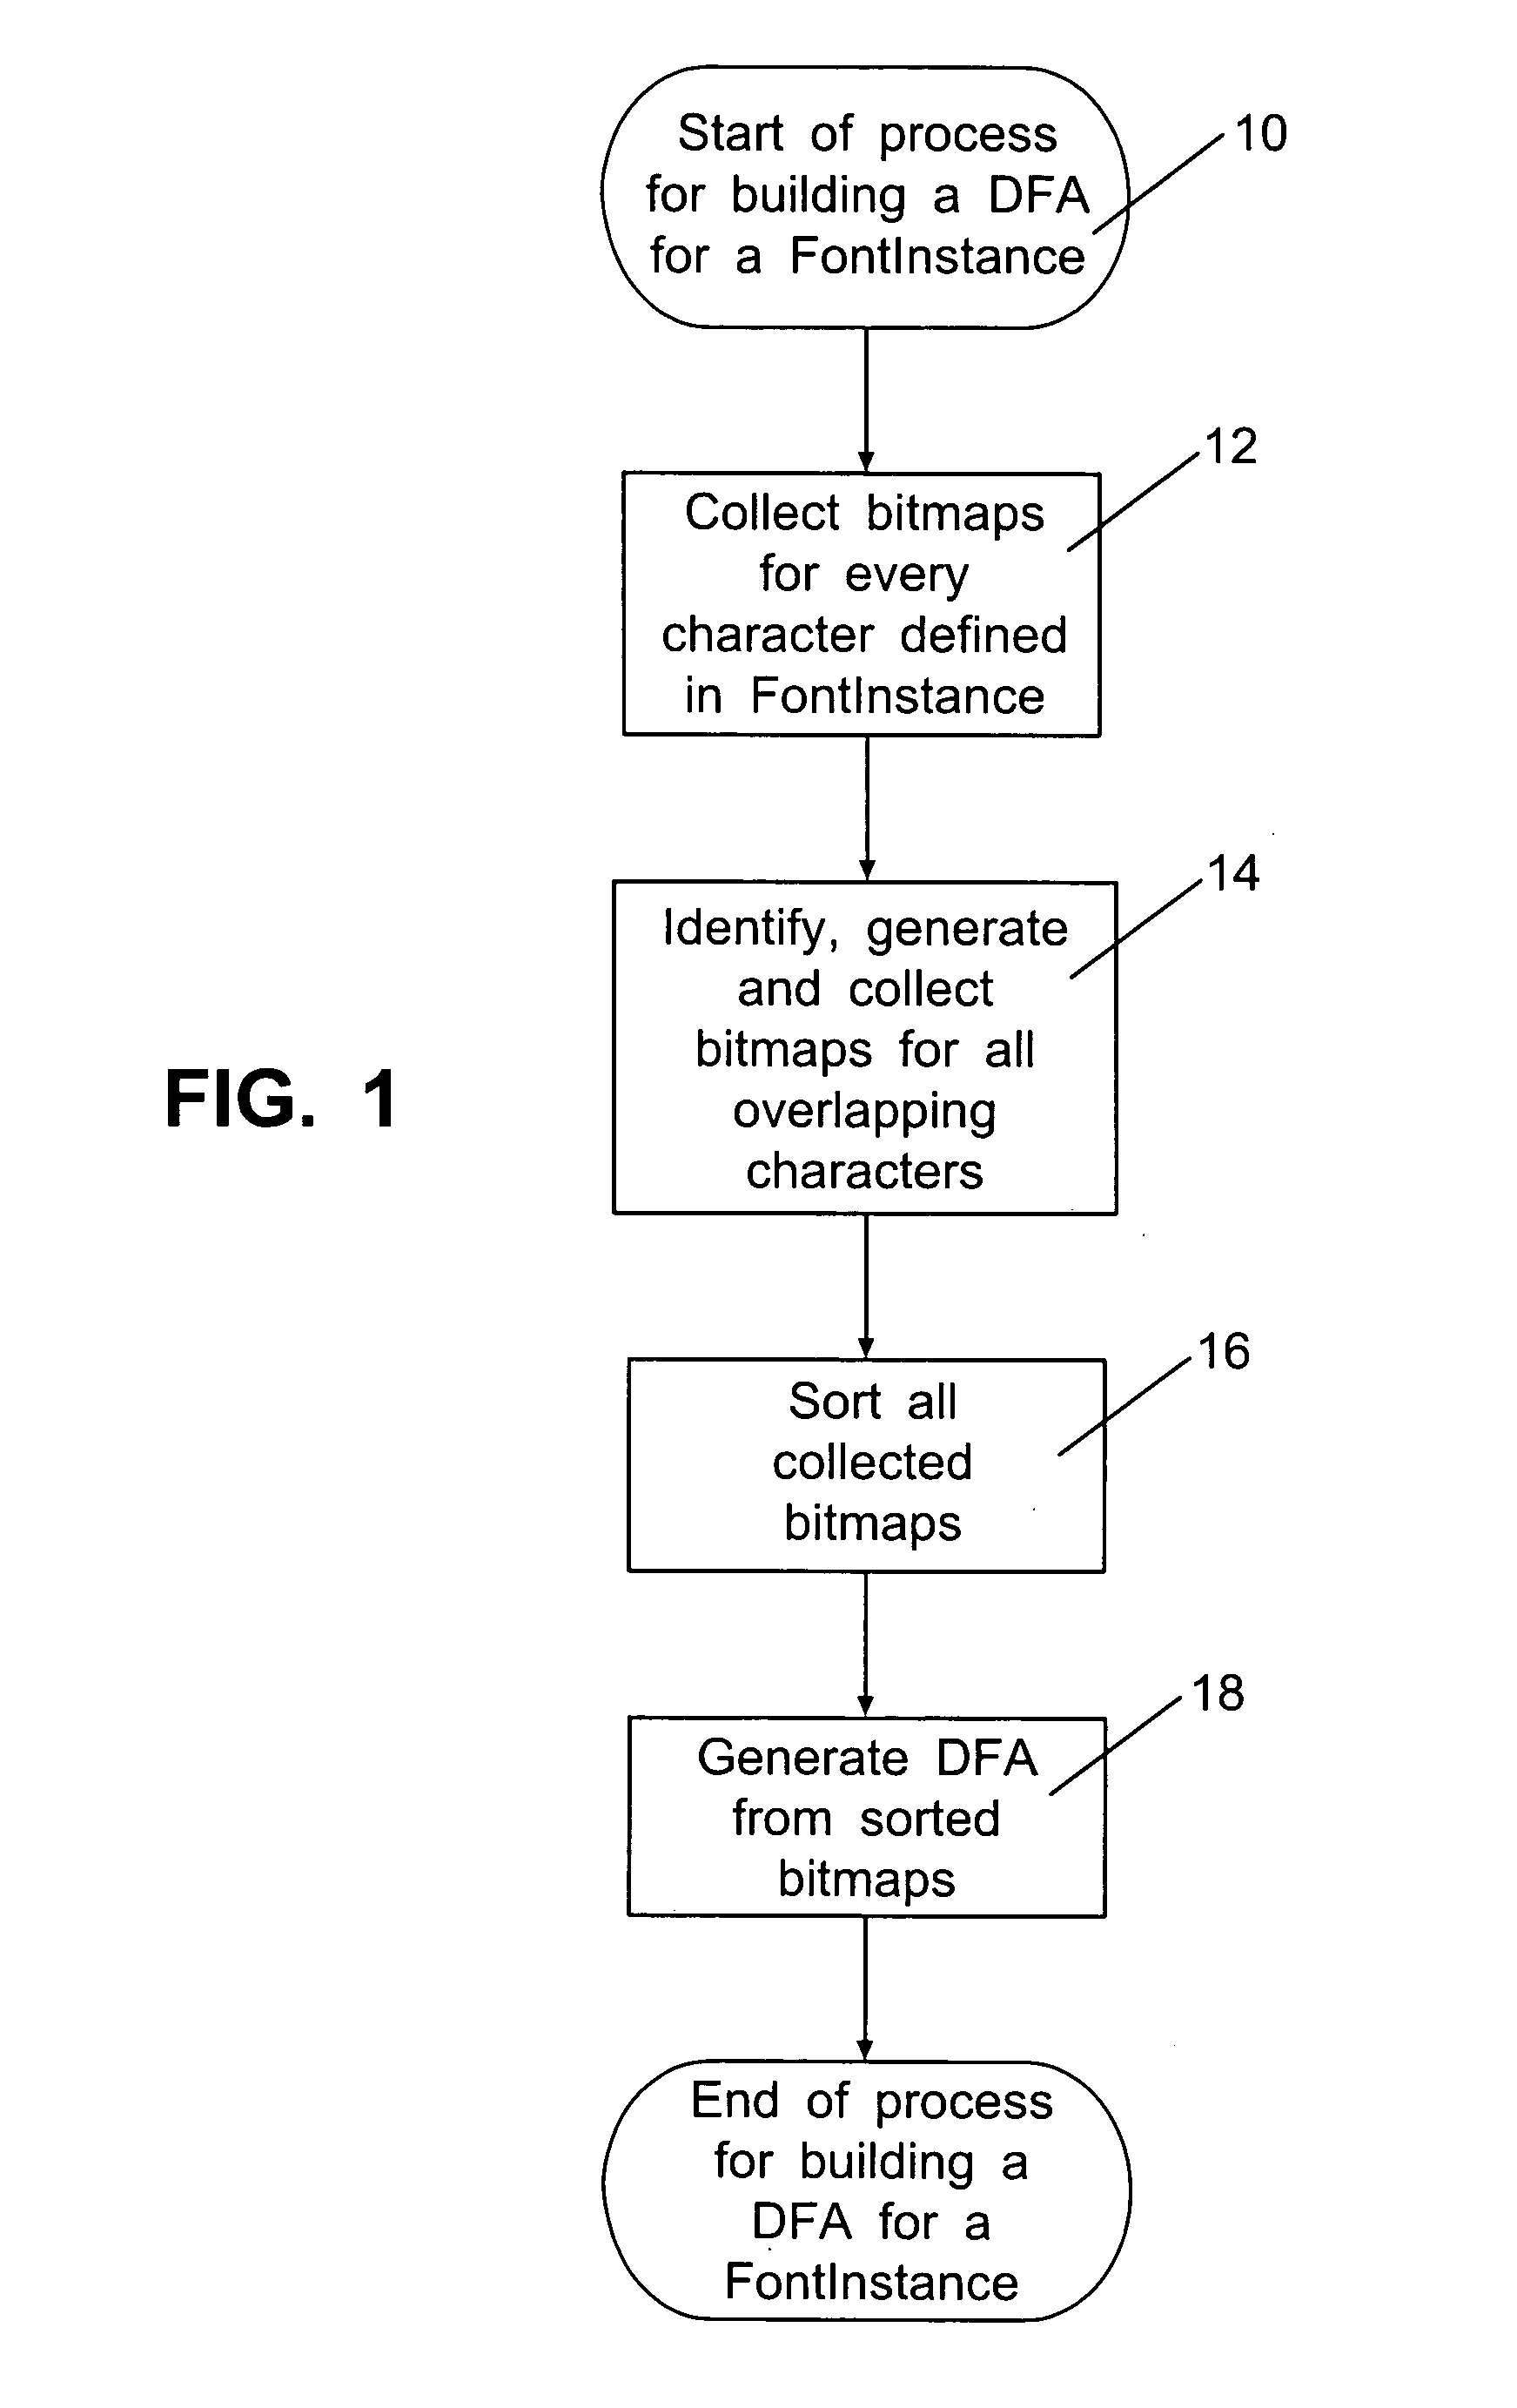 Method and system for recognizing machine generated character glyphs and icons in graphic images